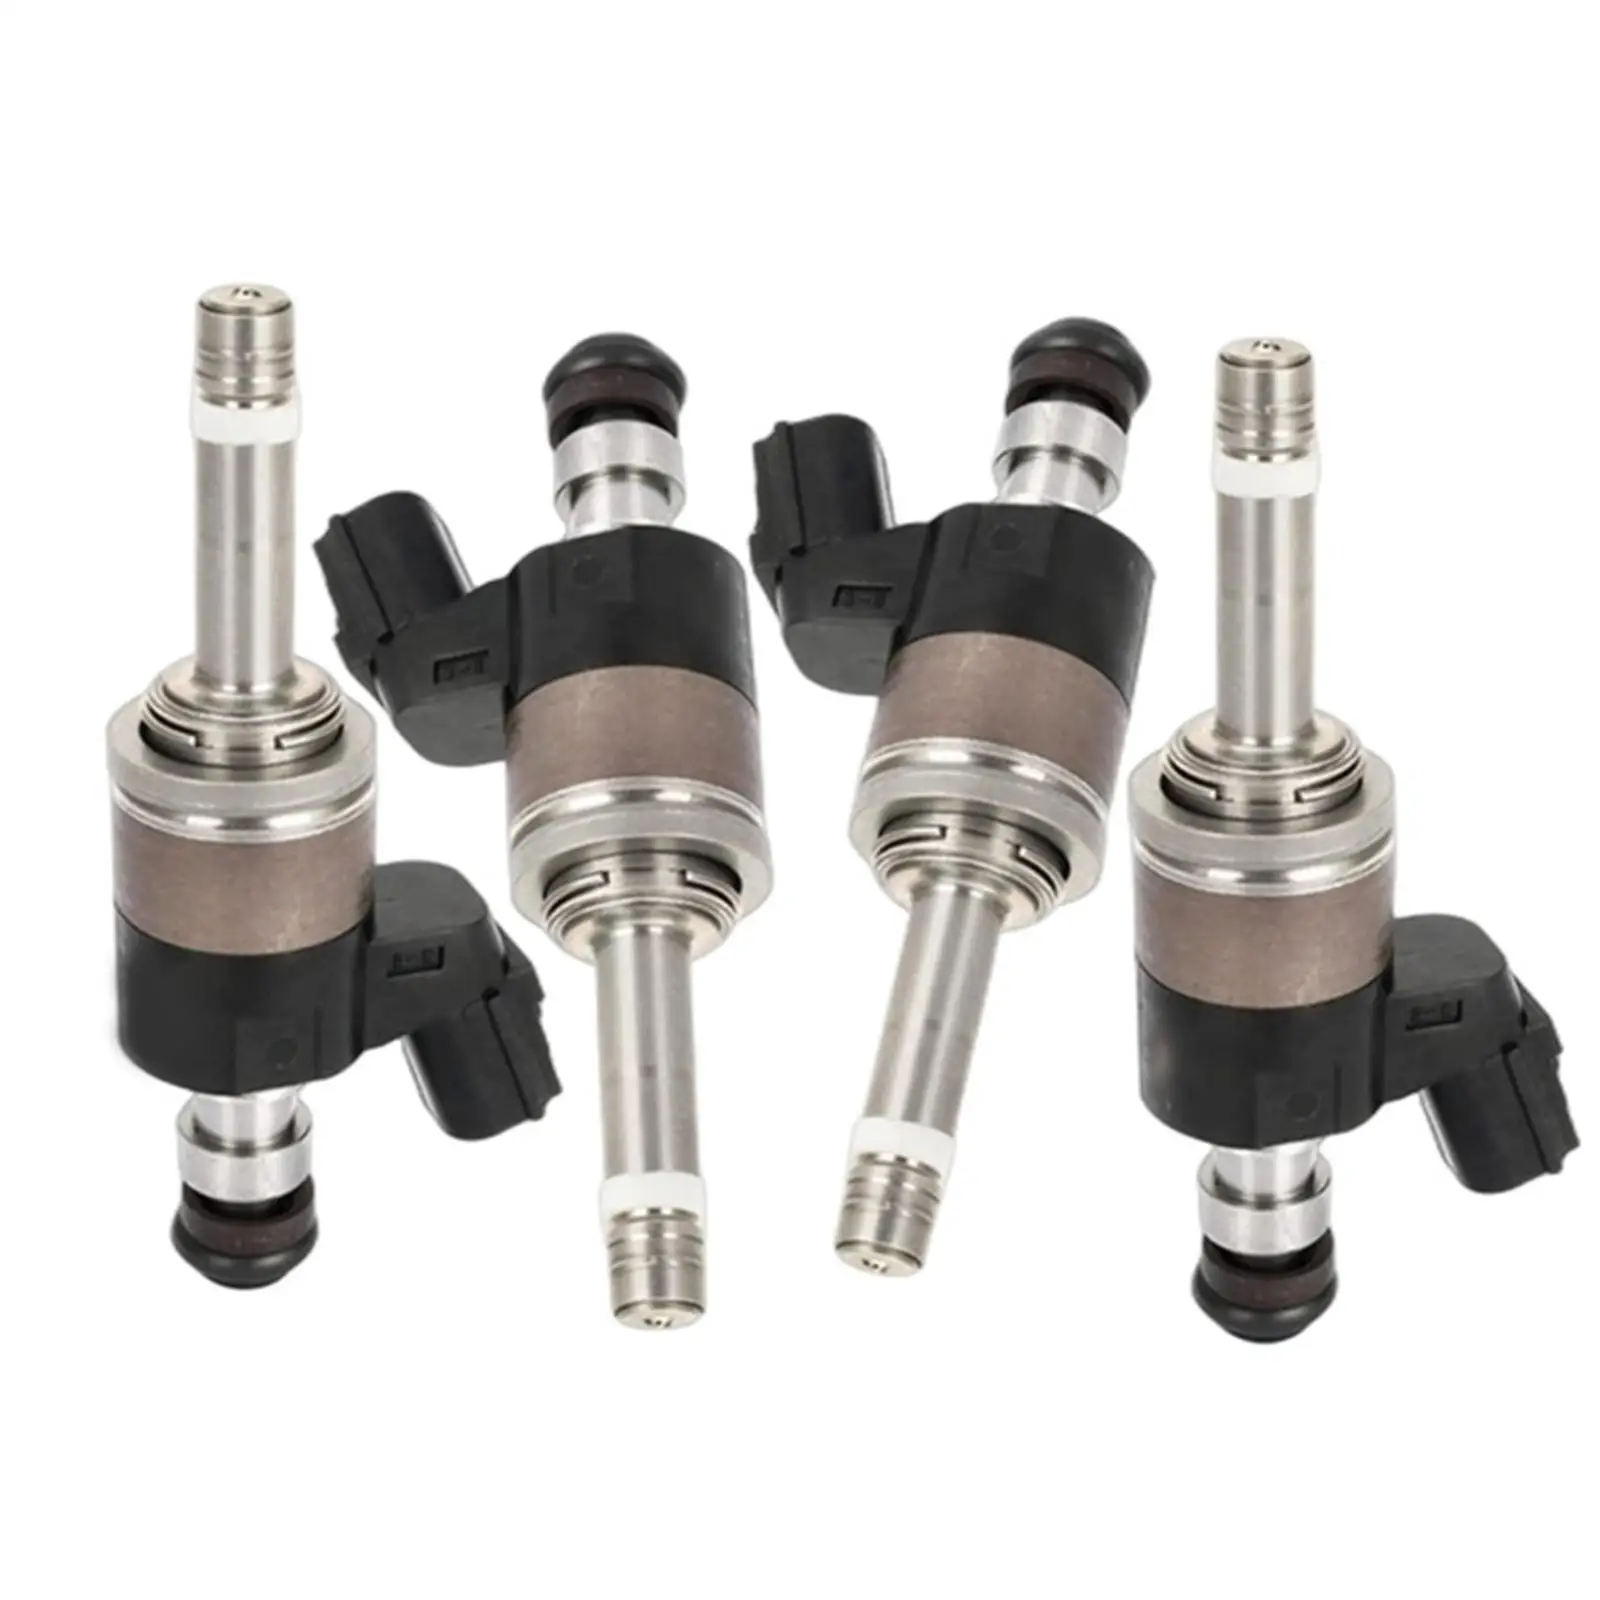 

4Pcs Car Fuel Injector Stable Performance 16010-5R1-305 for Honda Fit 1.5L L4 2015-2020 Easy to Install Accessories Durable